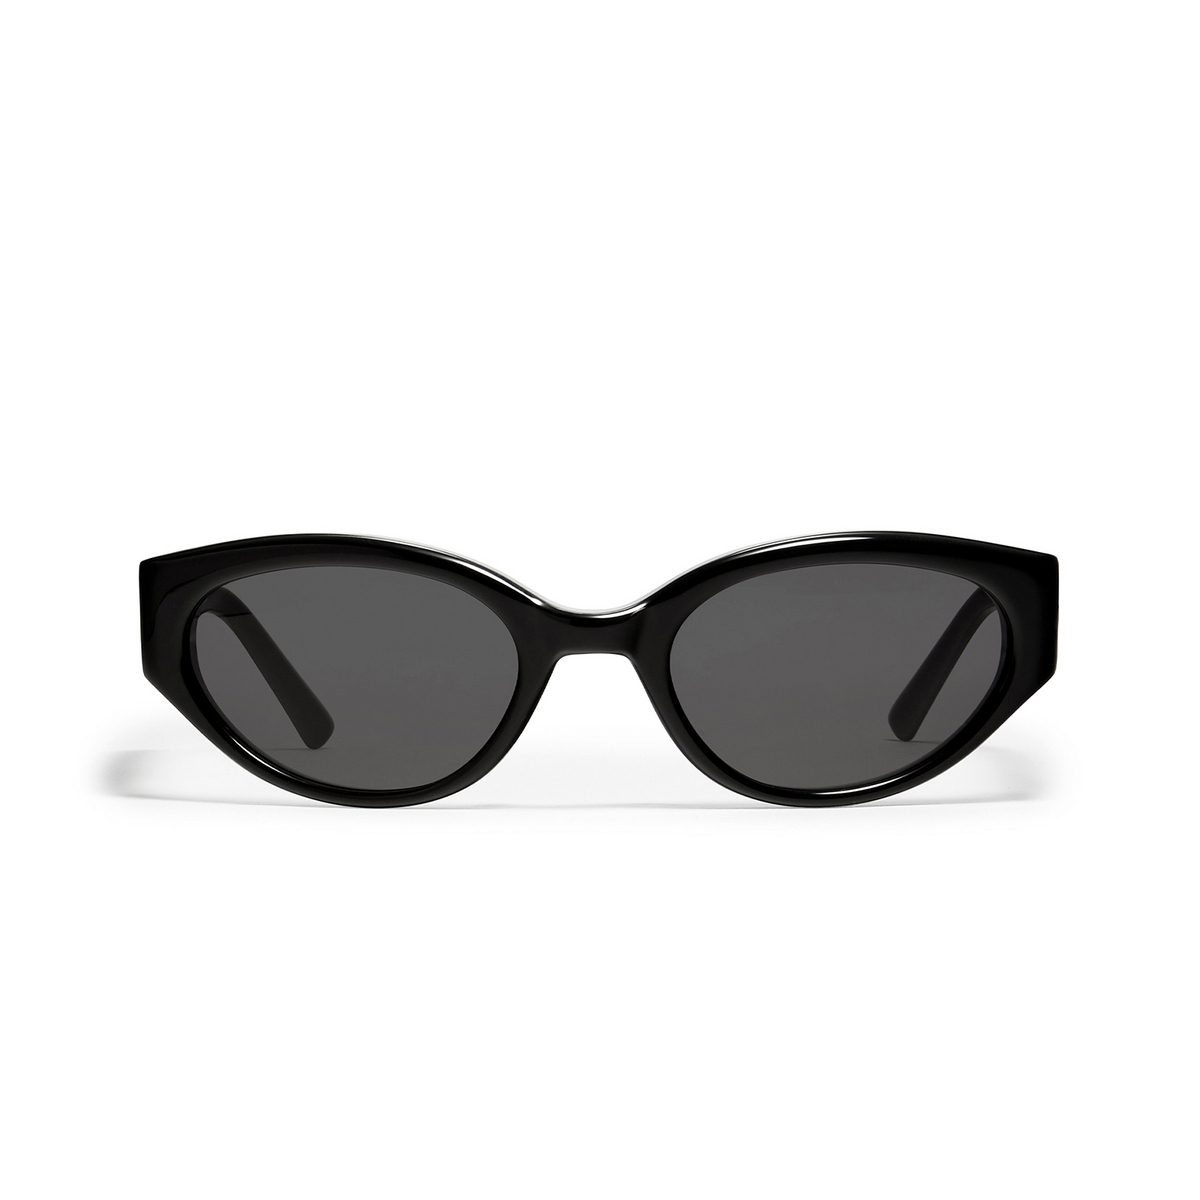 Gentle Monster MOLTO Sunglasses 01 Black - front view